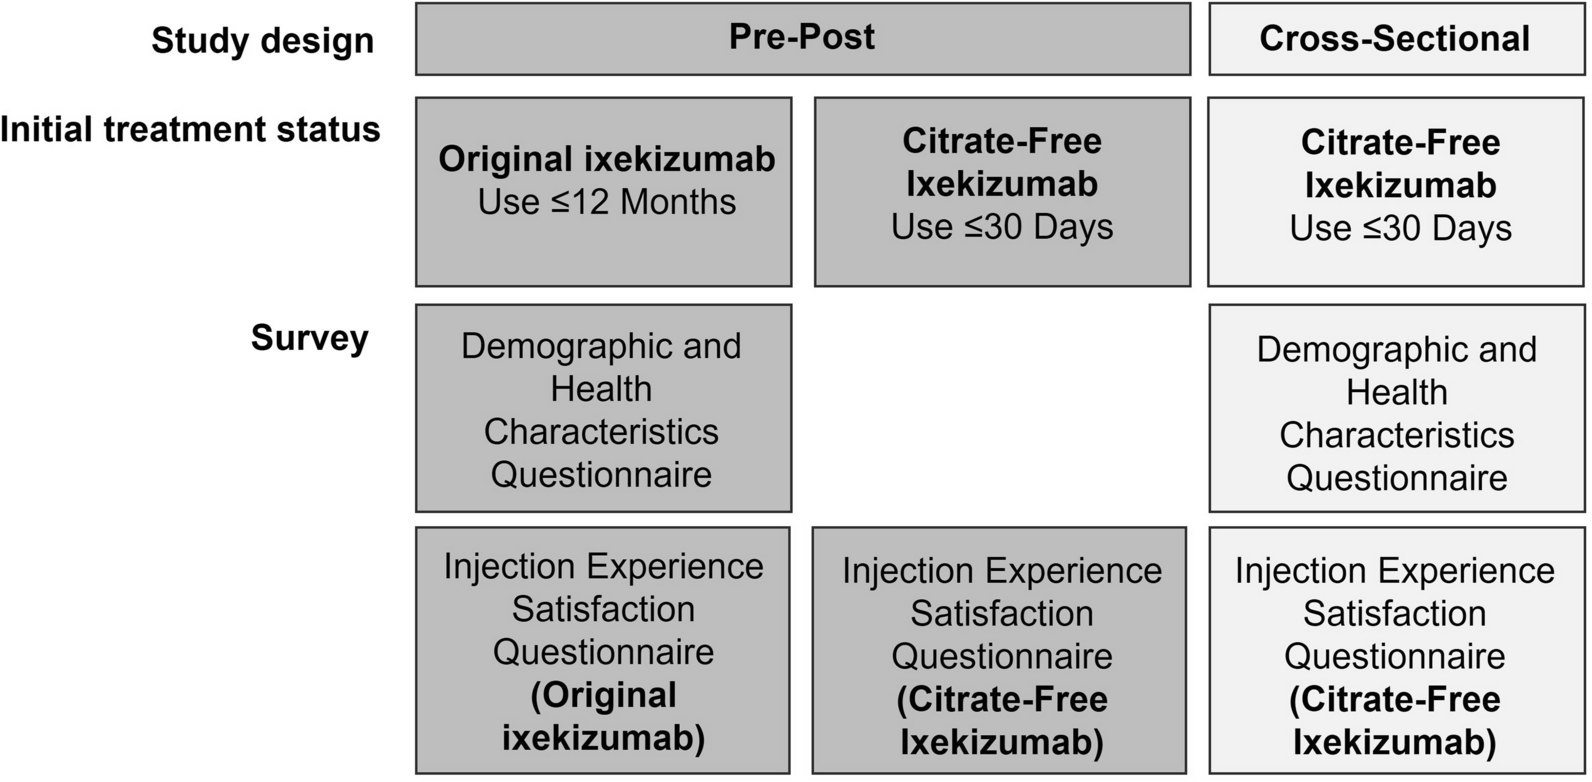 Satisfaction with the Injection Experience of a New, Citrate-Free Formulation of Ixekizumab